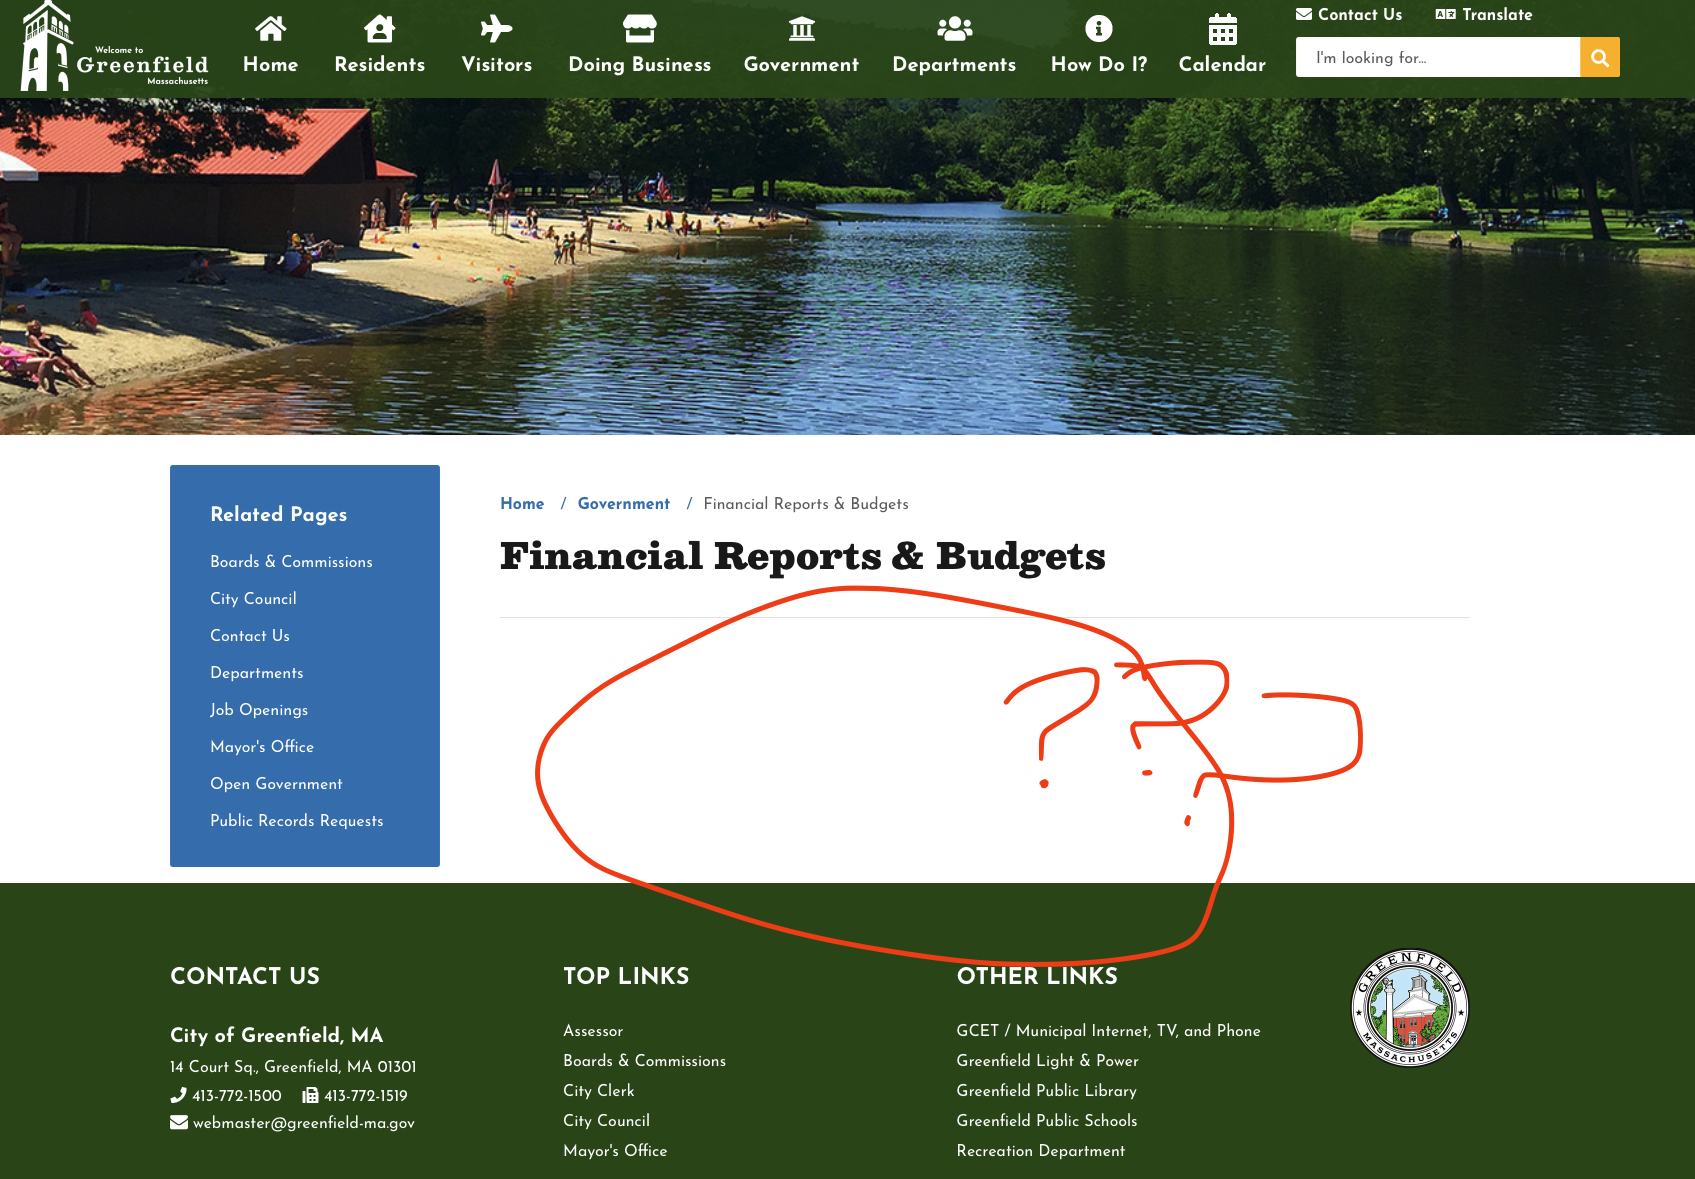 Screenshot of the Financial Reports and Budgets section of the Greenfield, MA city website